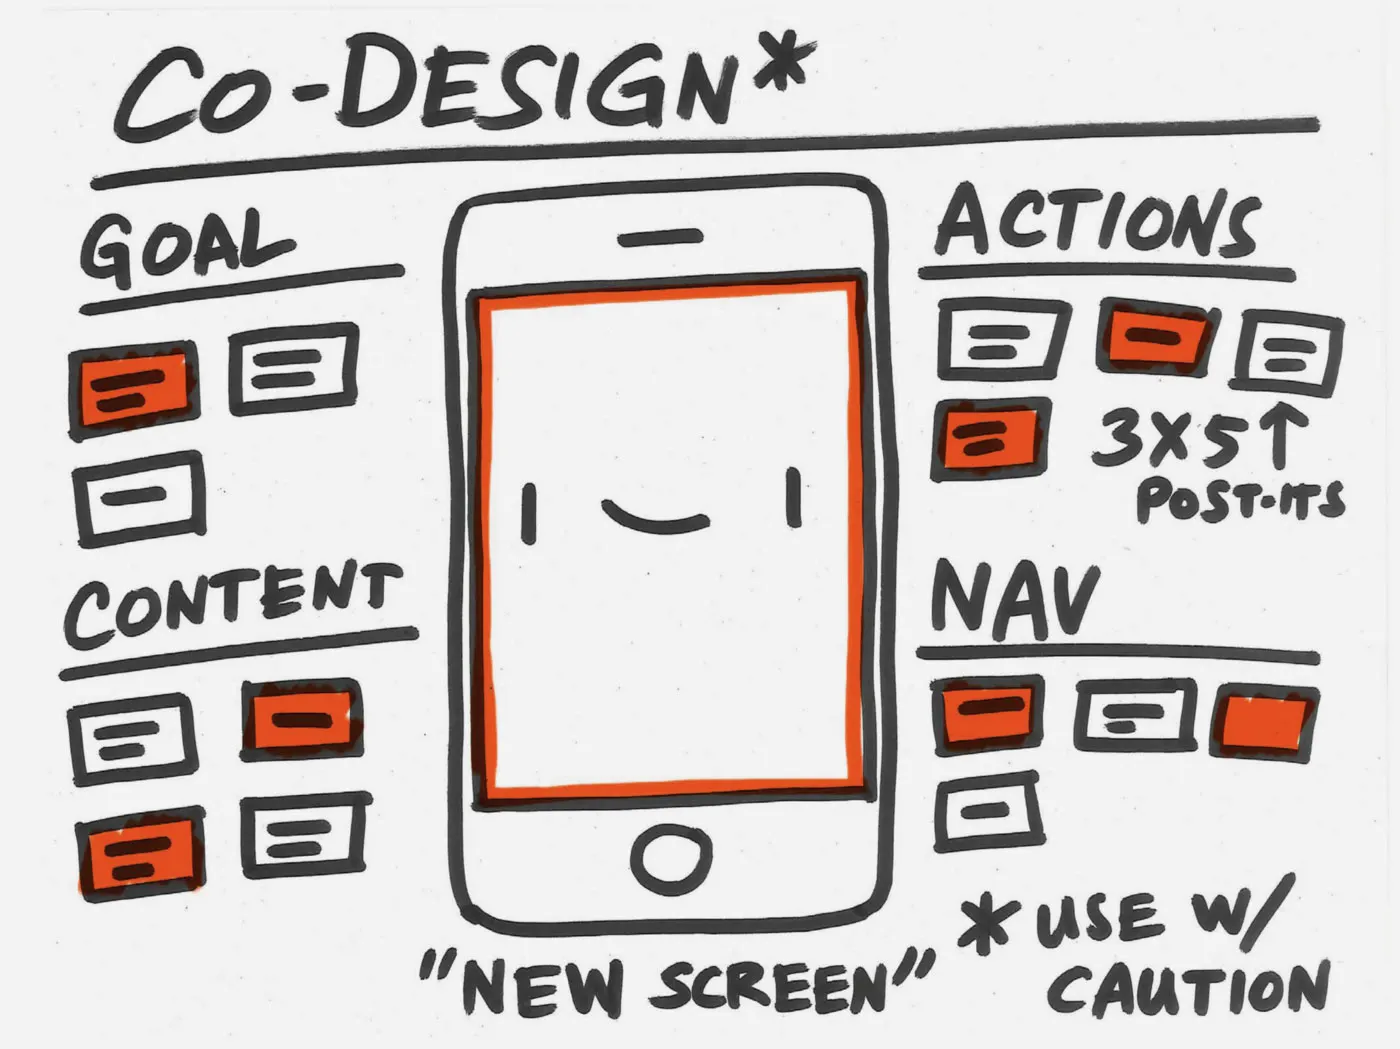 Black marker sketch of an iPhone with the heading "Co-design*" and underneath it list-making subheads: Goal. Content. Actions. Nav.